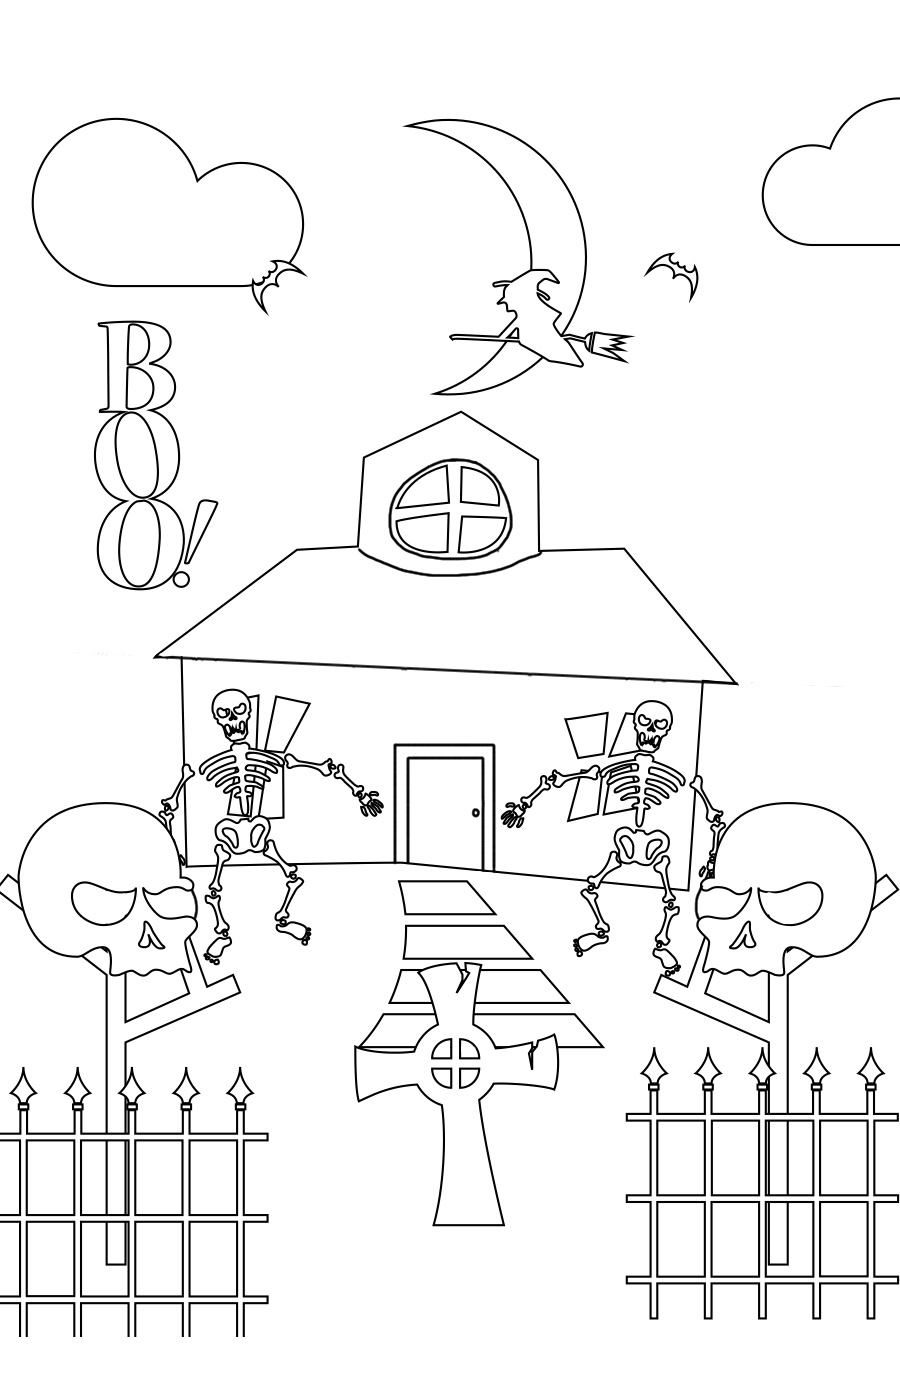 Skeleton and Zombie Coloring Page